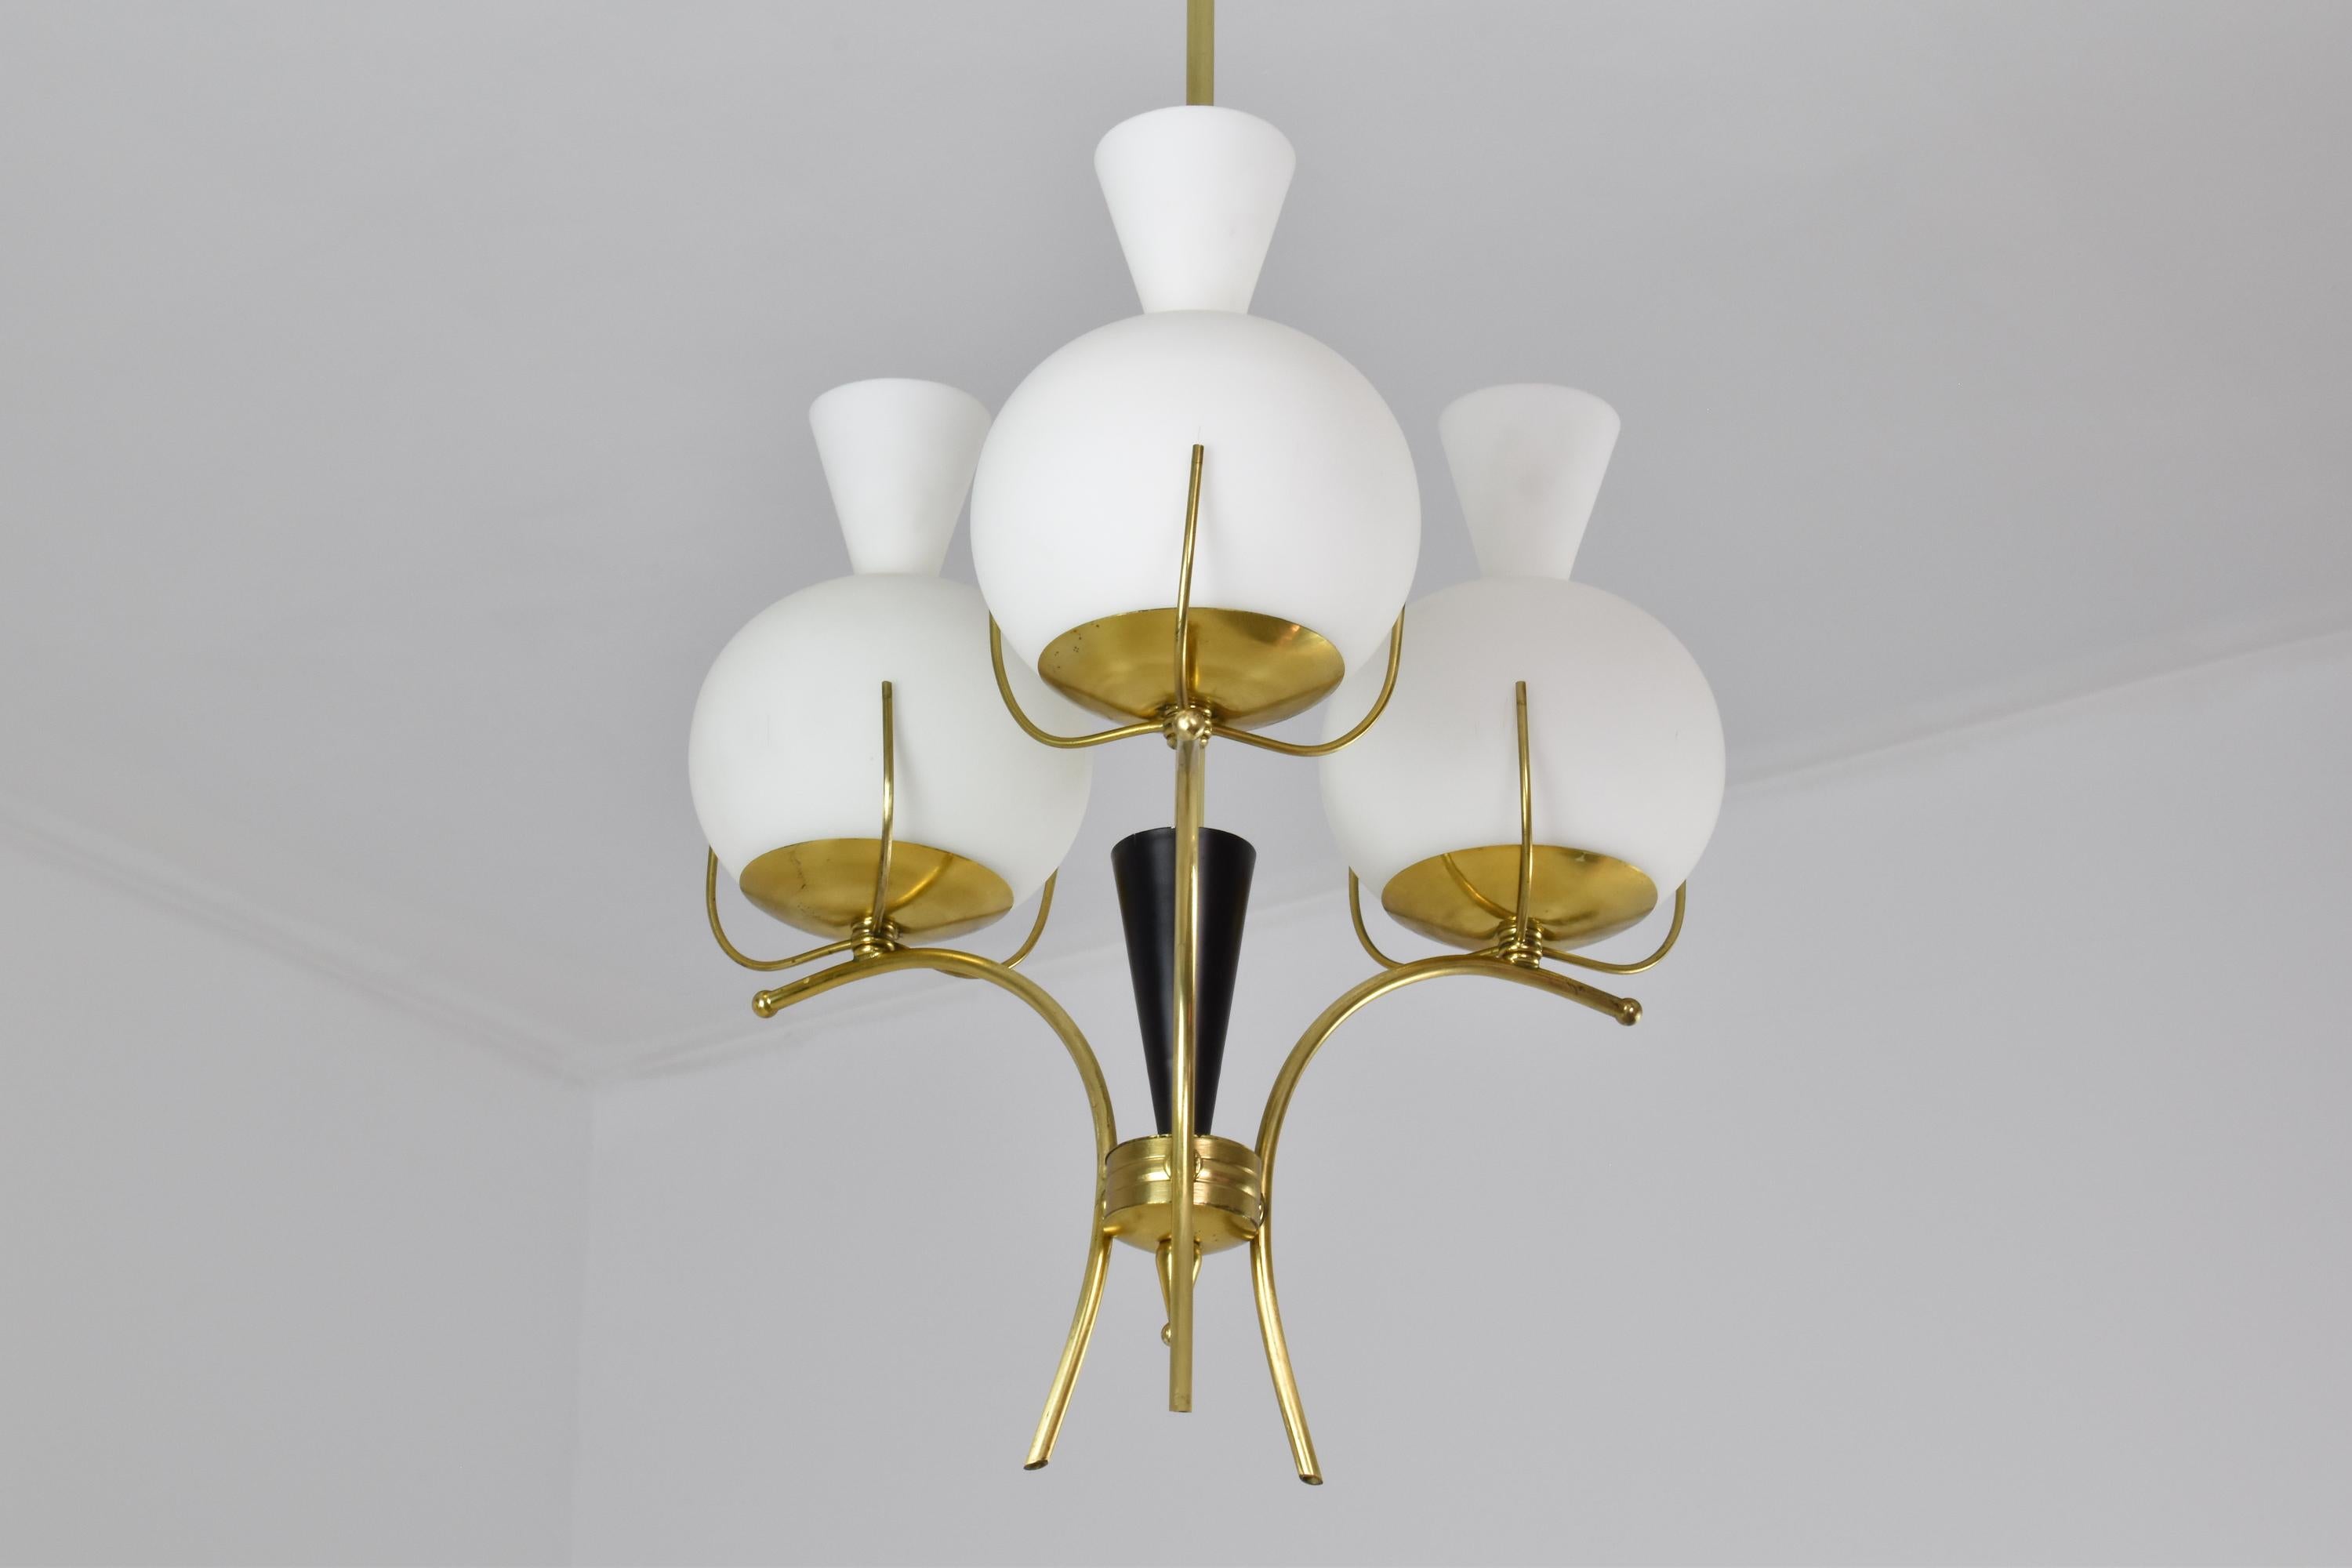 A sculptural 20th-century Italian vintage pendant light designed by the iconic Italian designer Angelo Lelli in the 1950s. This magnificent collectible piece is highlighted by the slender brass structure and original opaline glass shades. 
Italy.